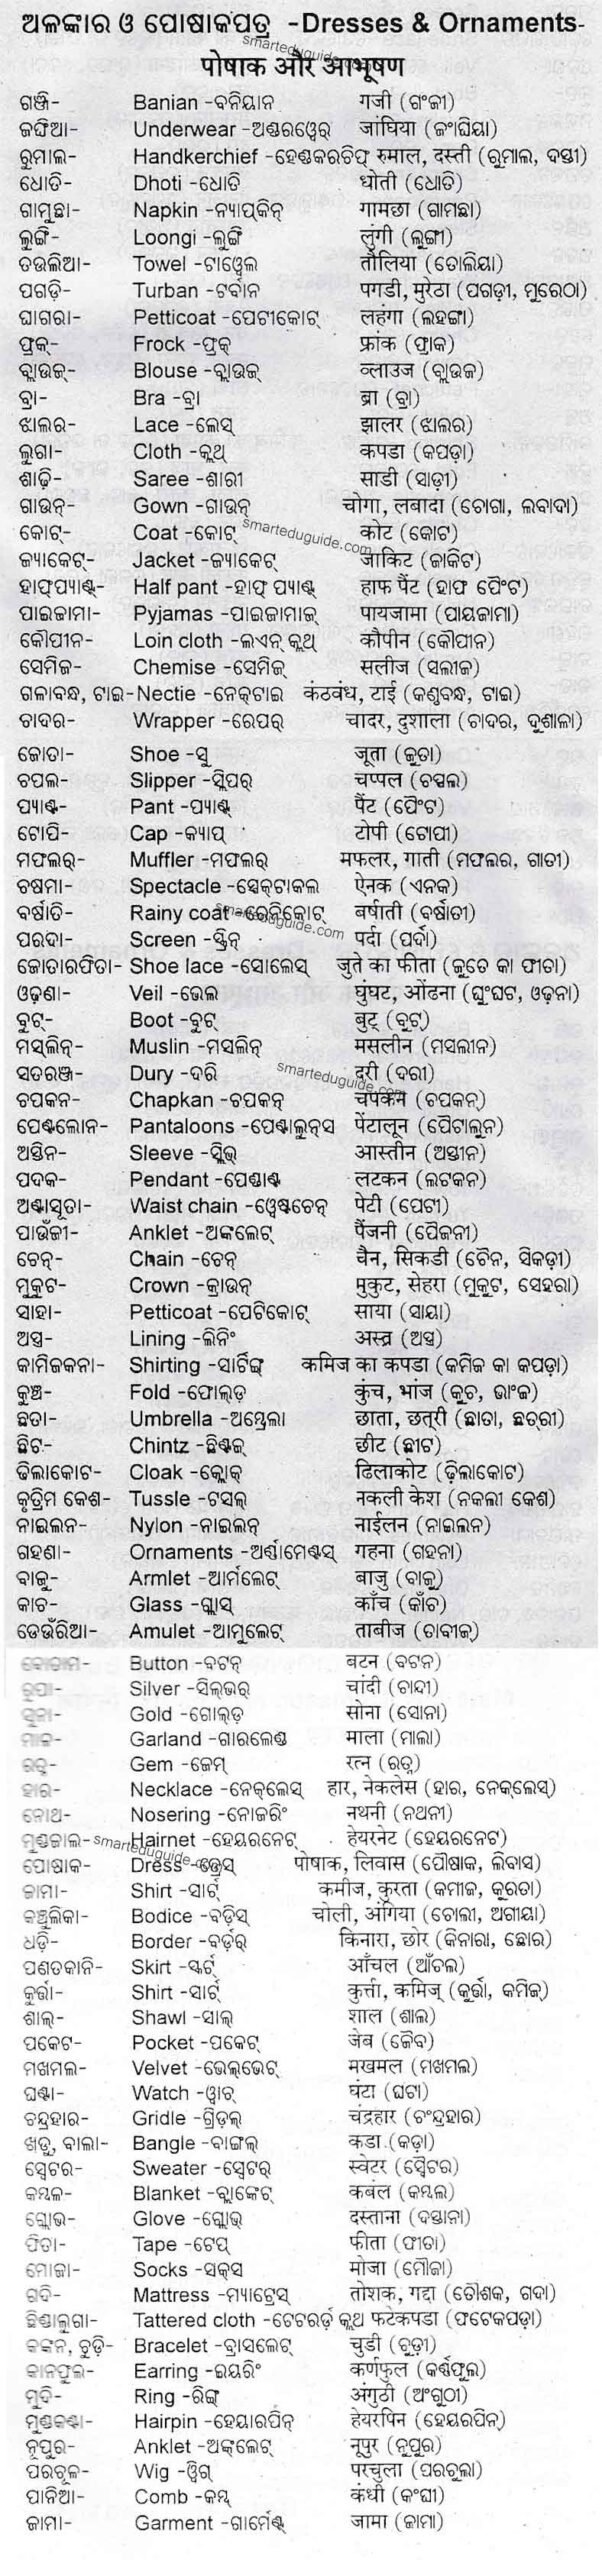 Dresses and Ornaments Name in English to Odia